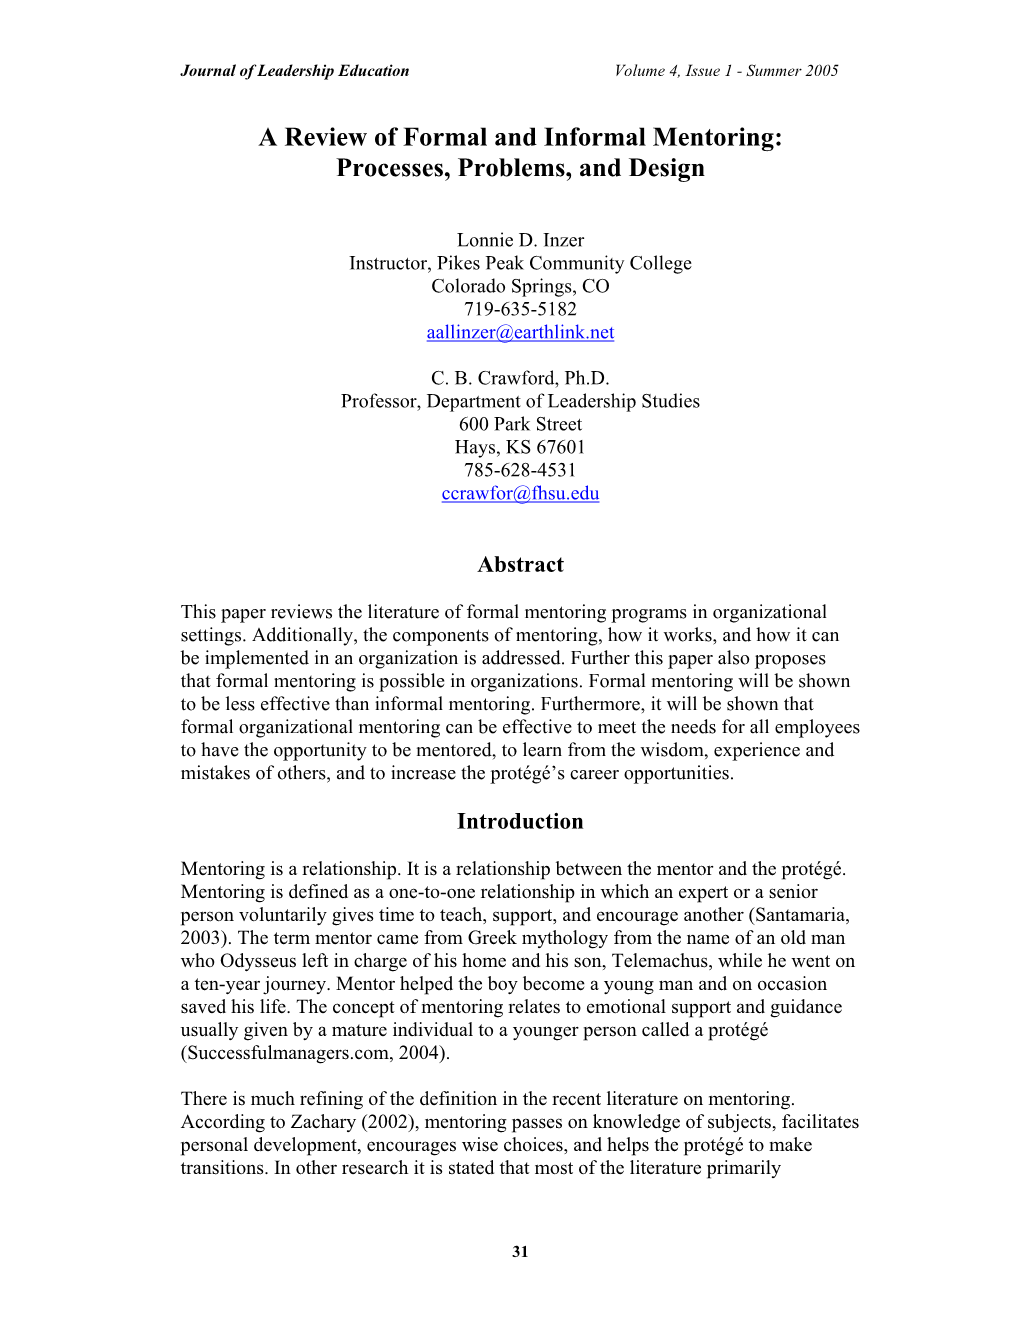 A Review of Formal and Informal Mentoring: Processes, Problems, and Design